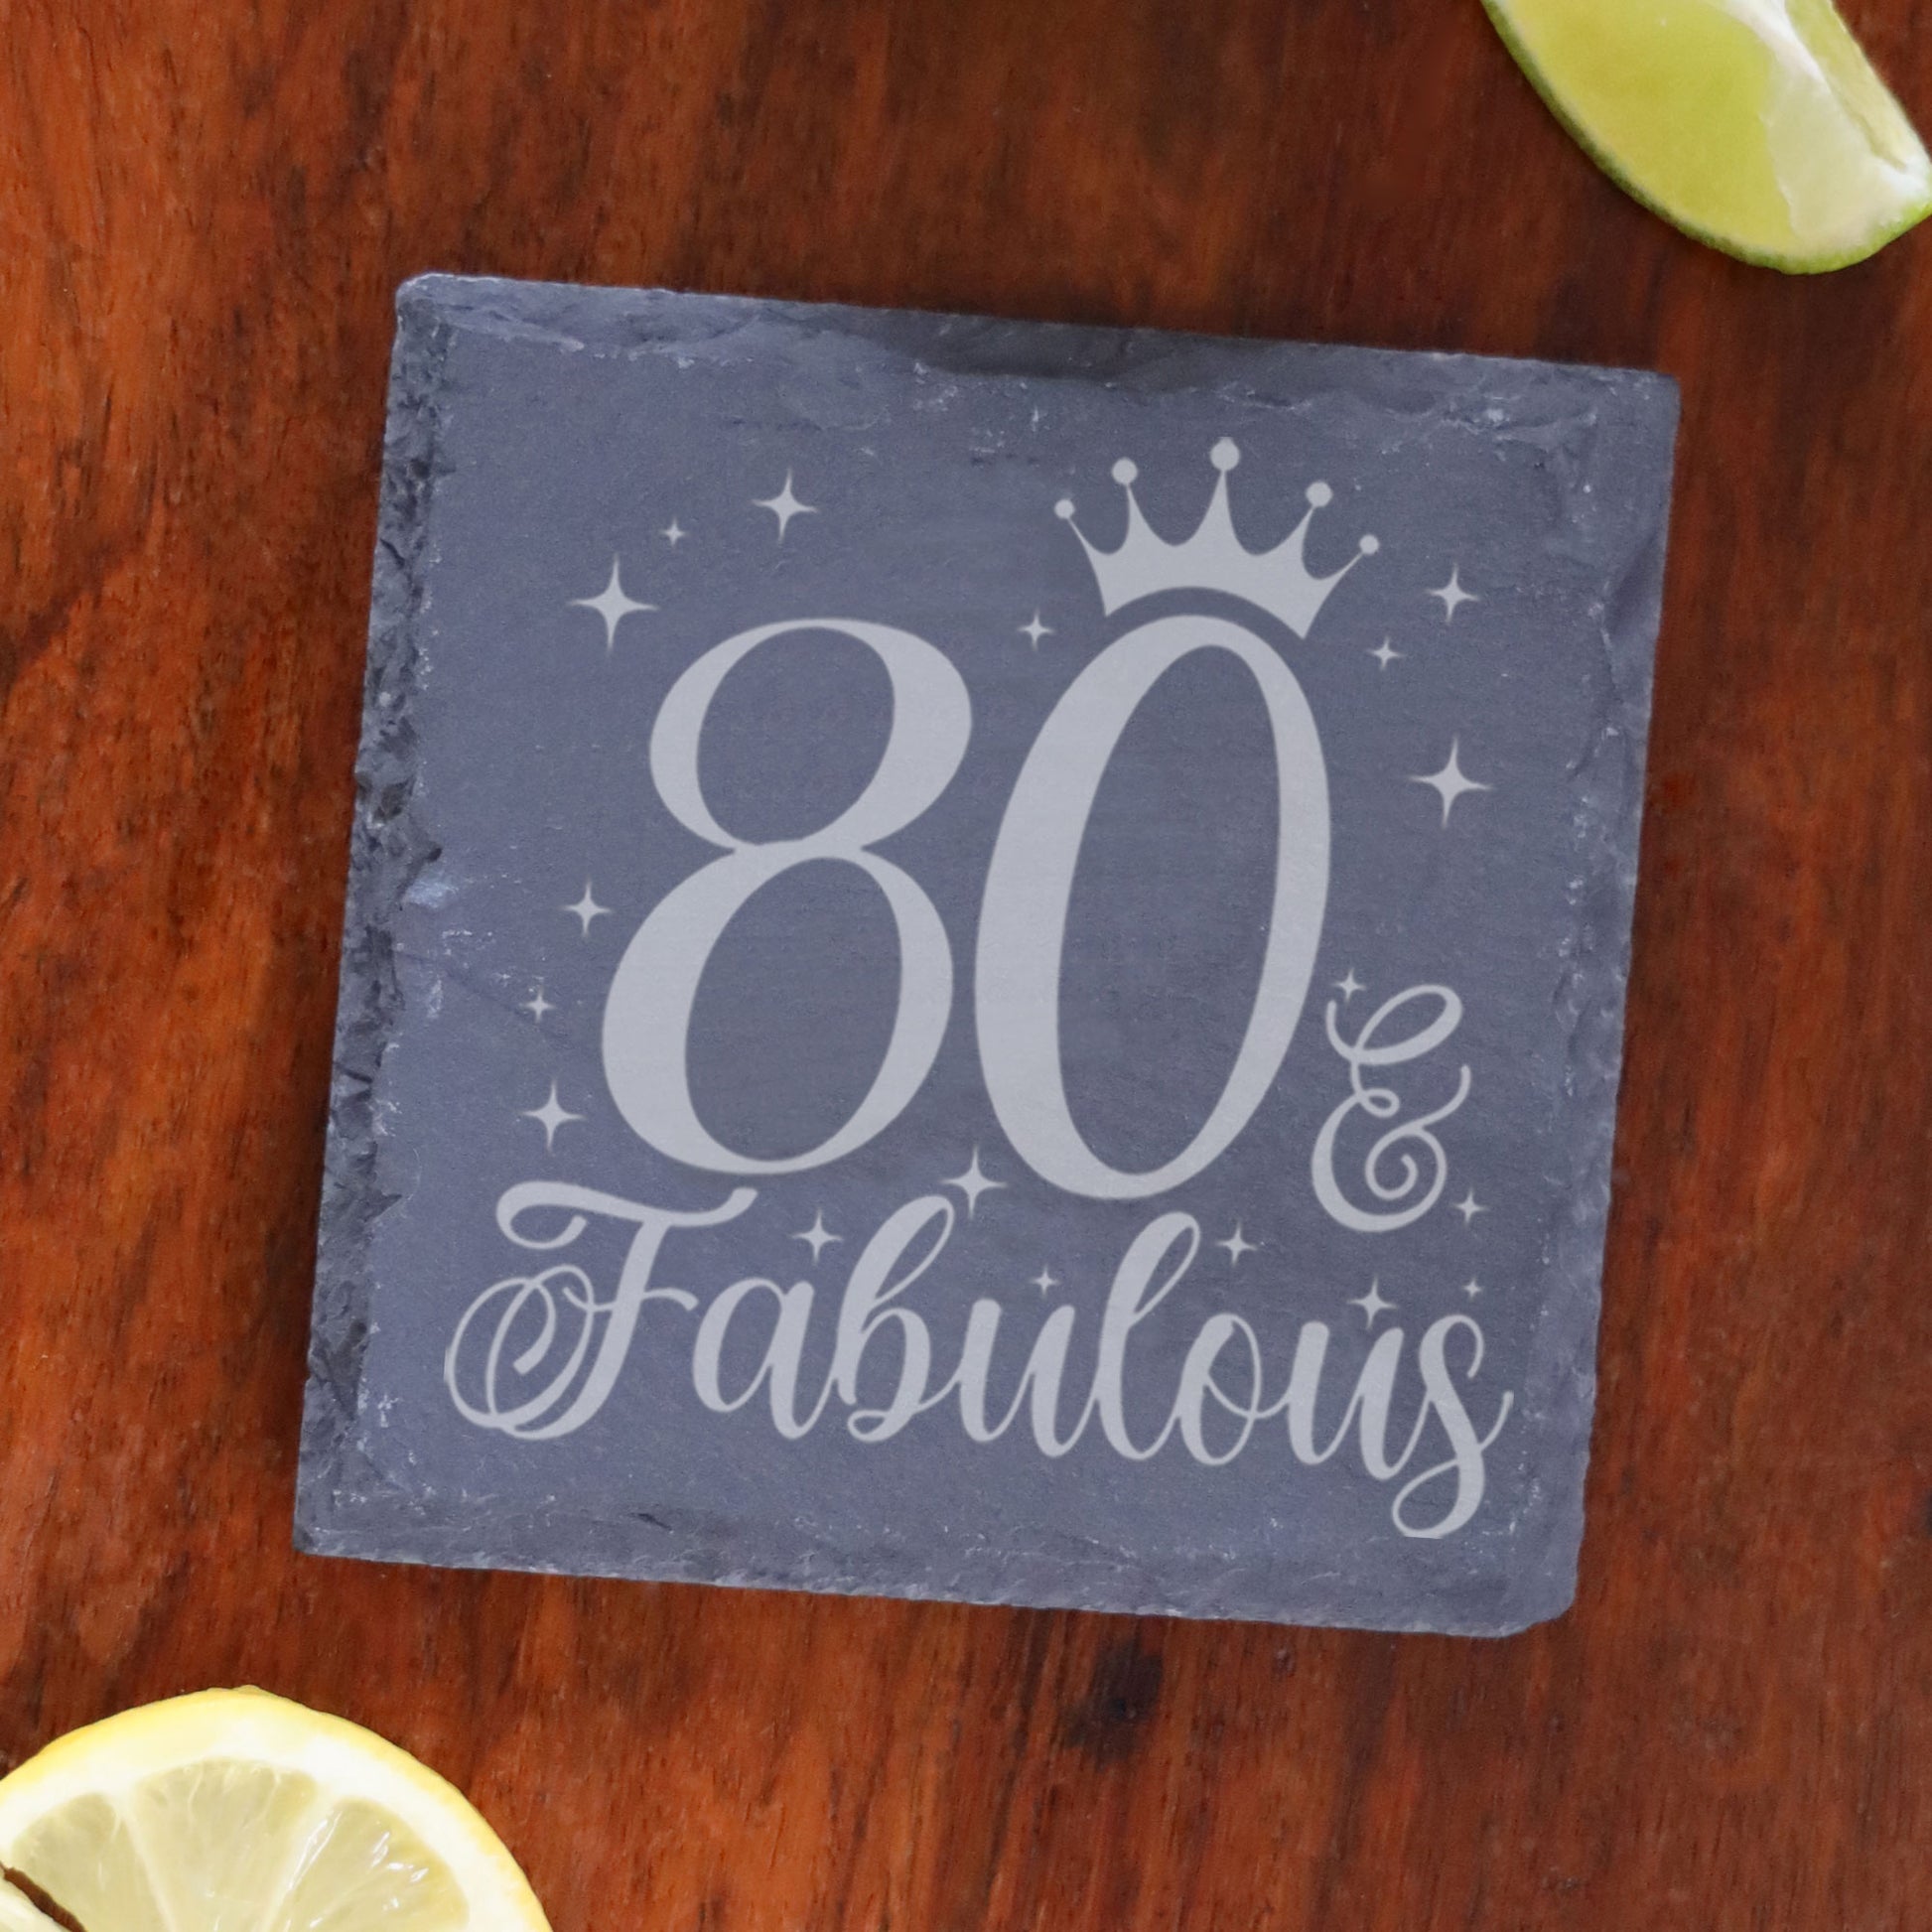 80 & Fabulous 80th Birthday Gift Engraved Wine Glass and/or Coaster Set  - Always Looking Good - Square Coaster Only  